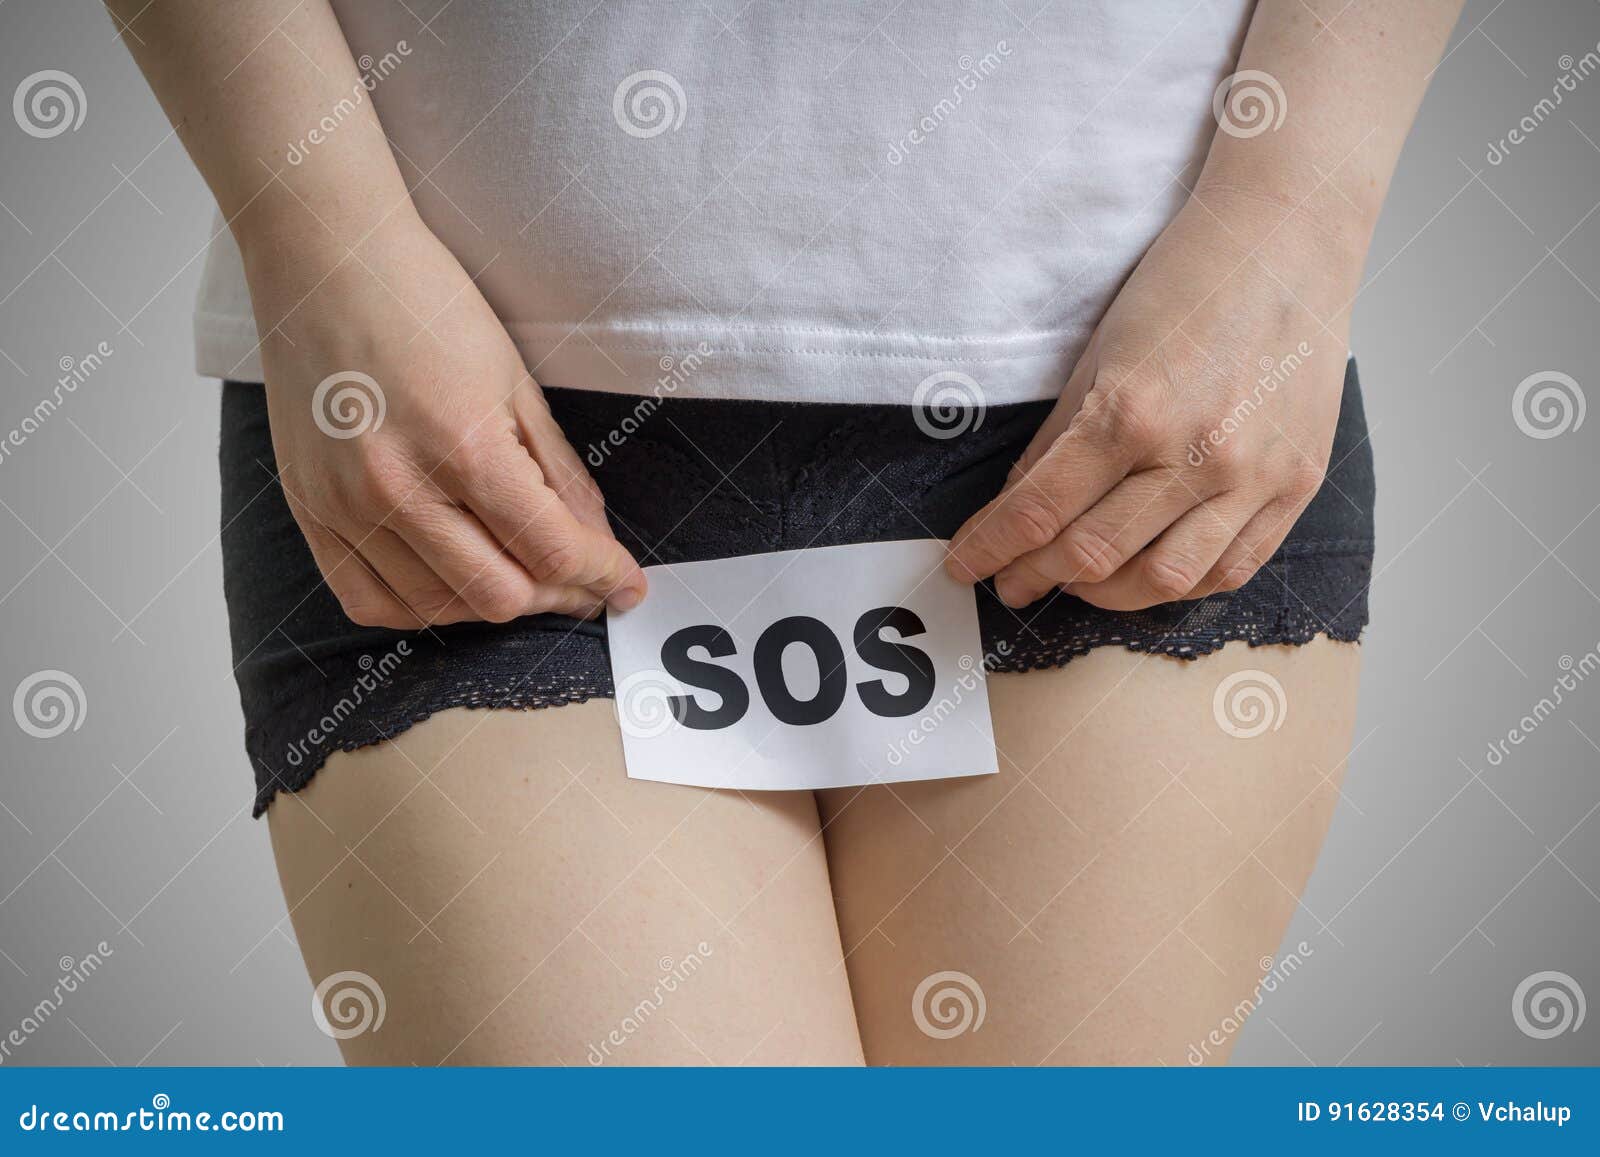 vaginal or urinary infection and problems concept. young woman holds paper with sos above crotch